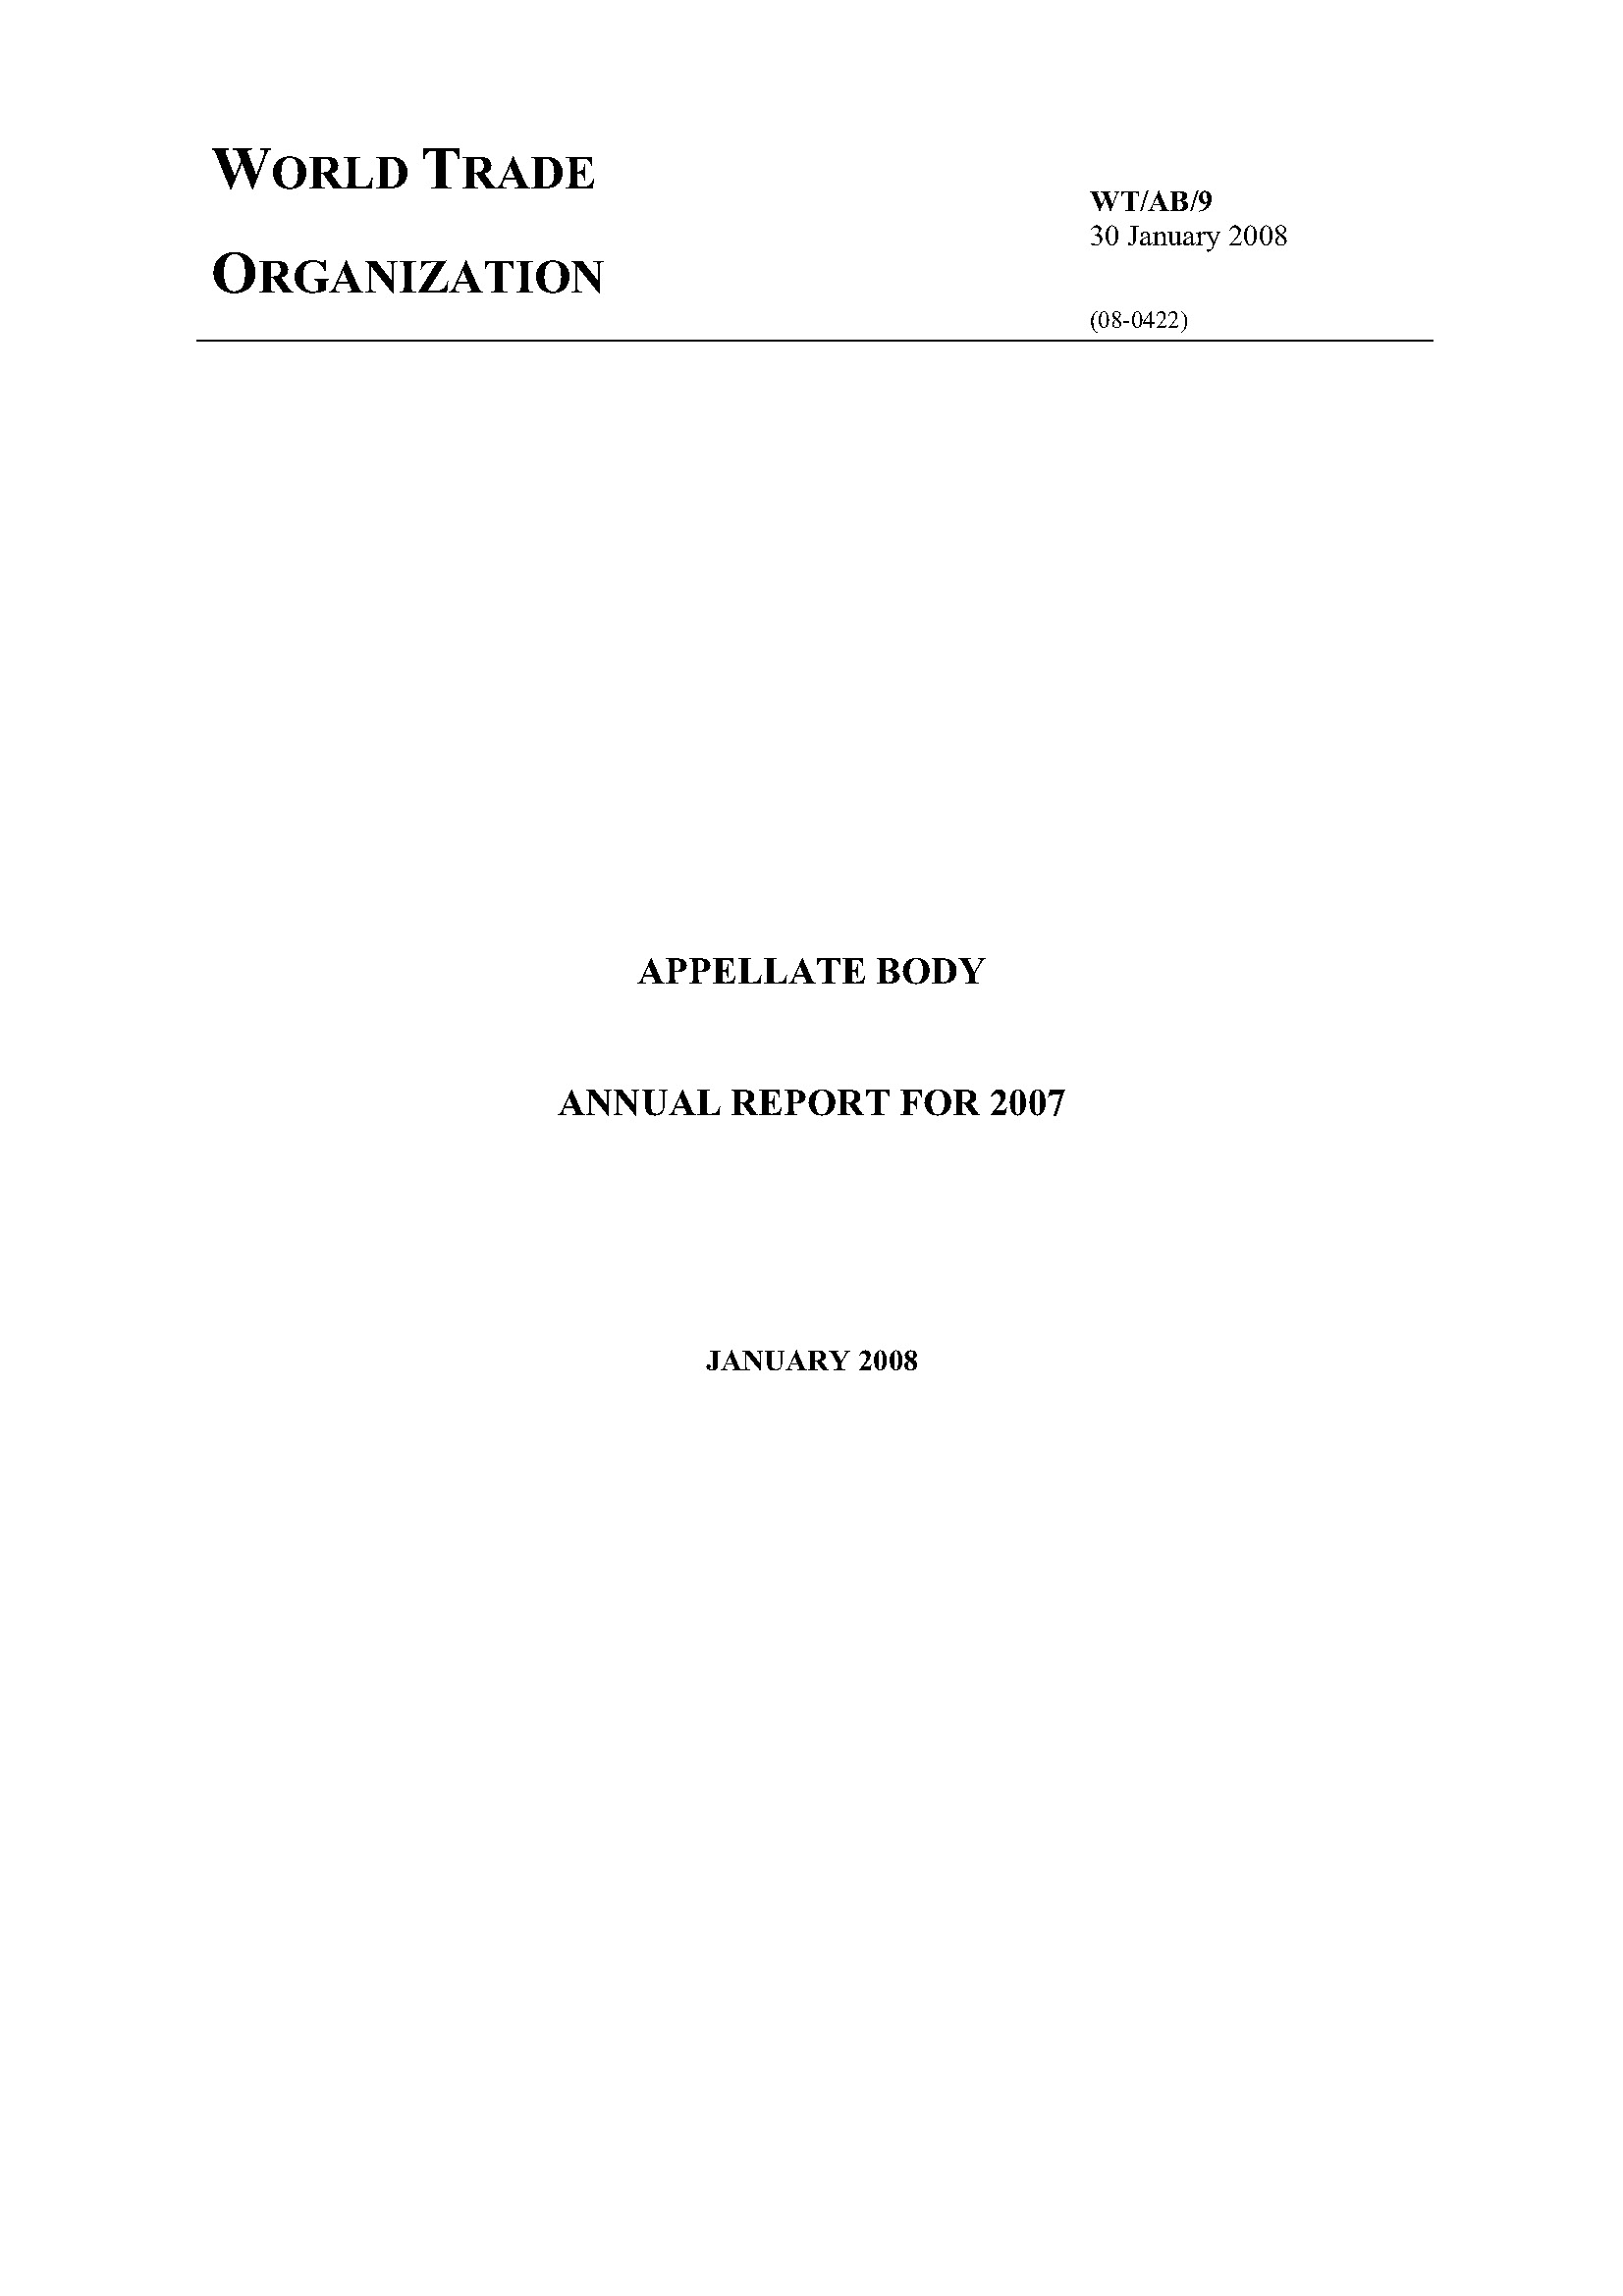 image of Appellate Body annual report for 2007